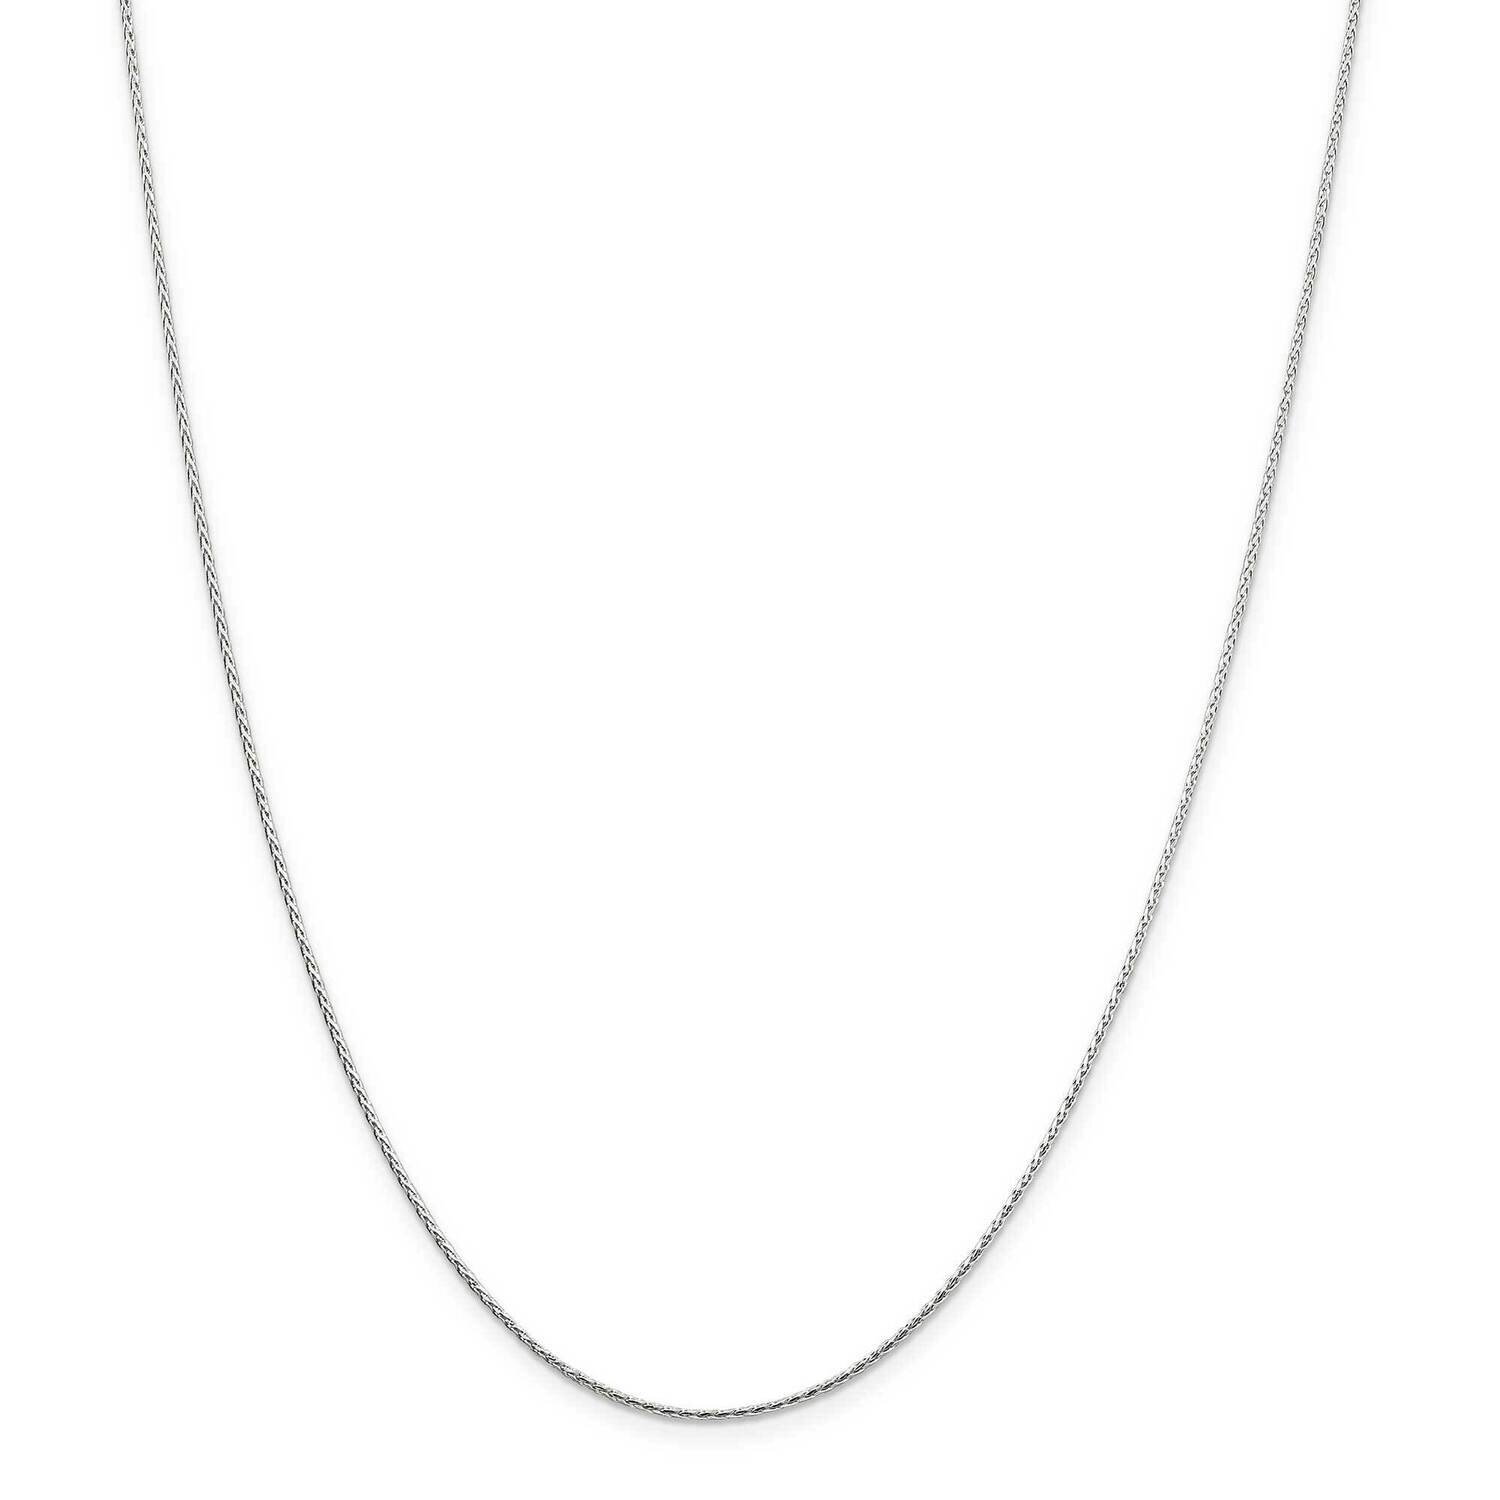 1.25mm Diamond-Cut Round Spiga Chain with 2 Inch Extender 18 Inch Sterling Silver QSR035E-18